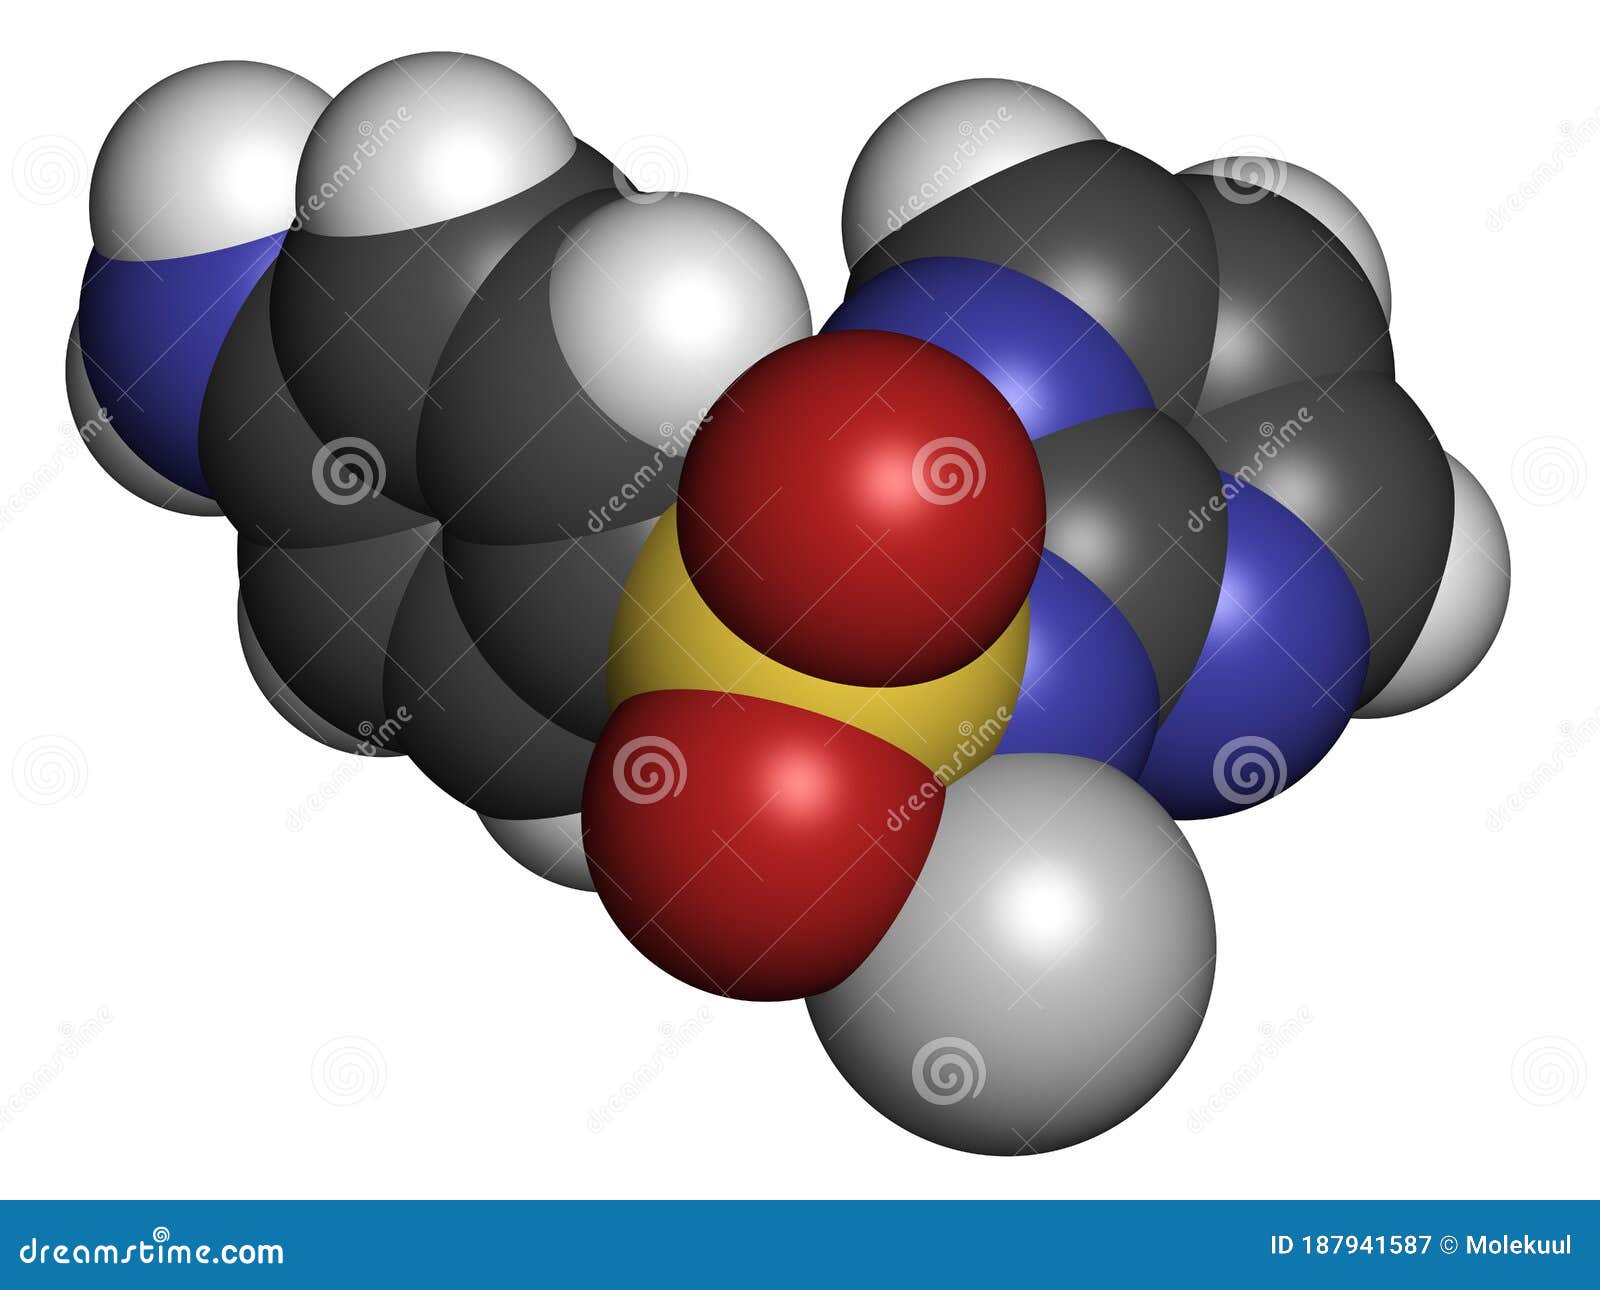 silver sulfadiazine topical antibacterial drug molecule. used in treatment of wounds and burns.